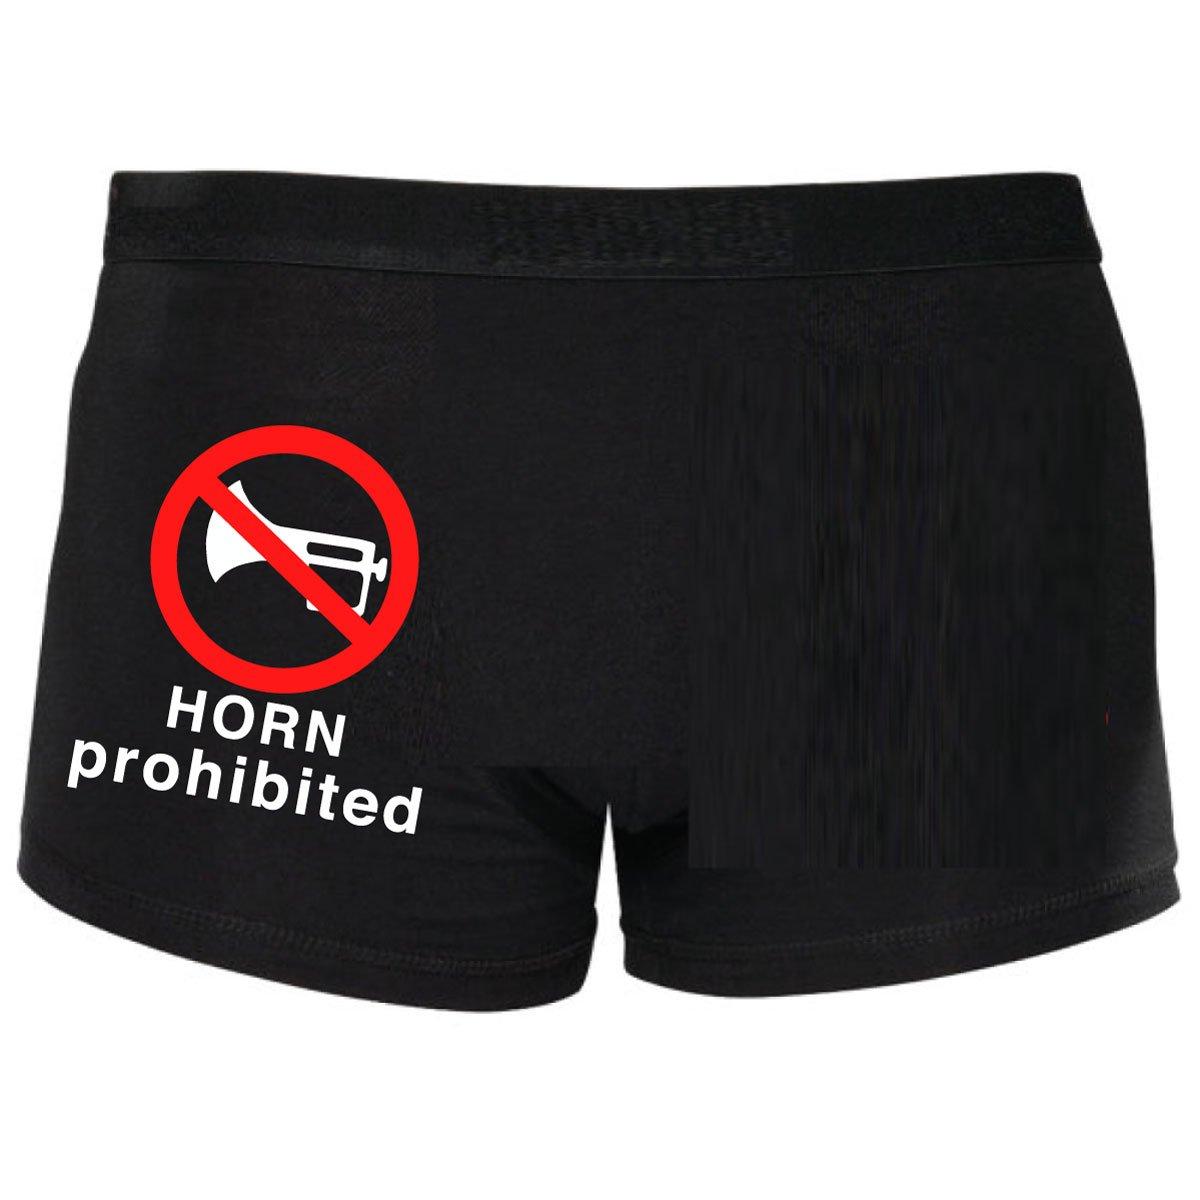 Funny Boxers Horn Prohibited Shorty Boxers